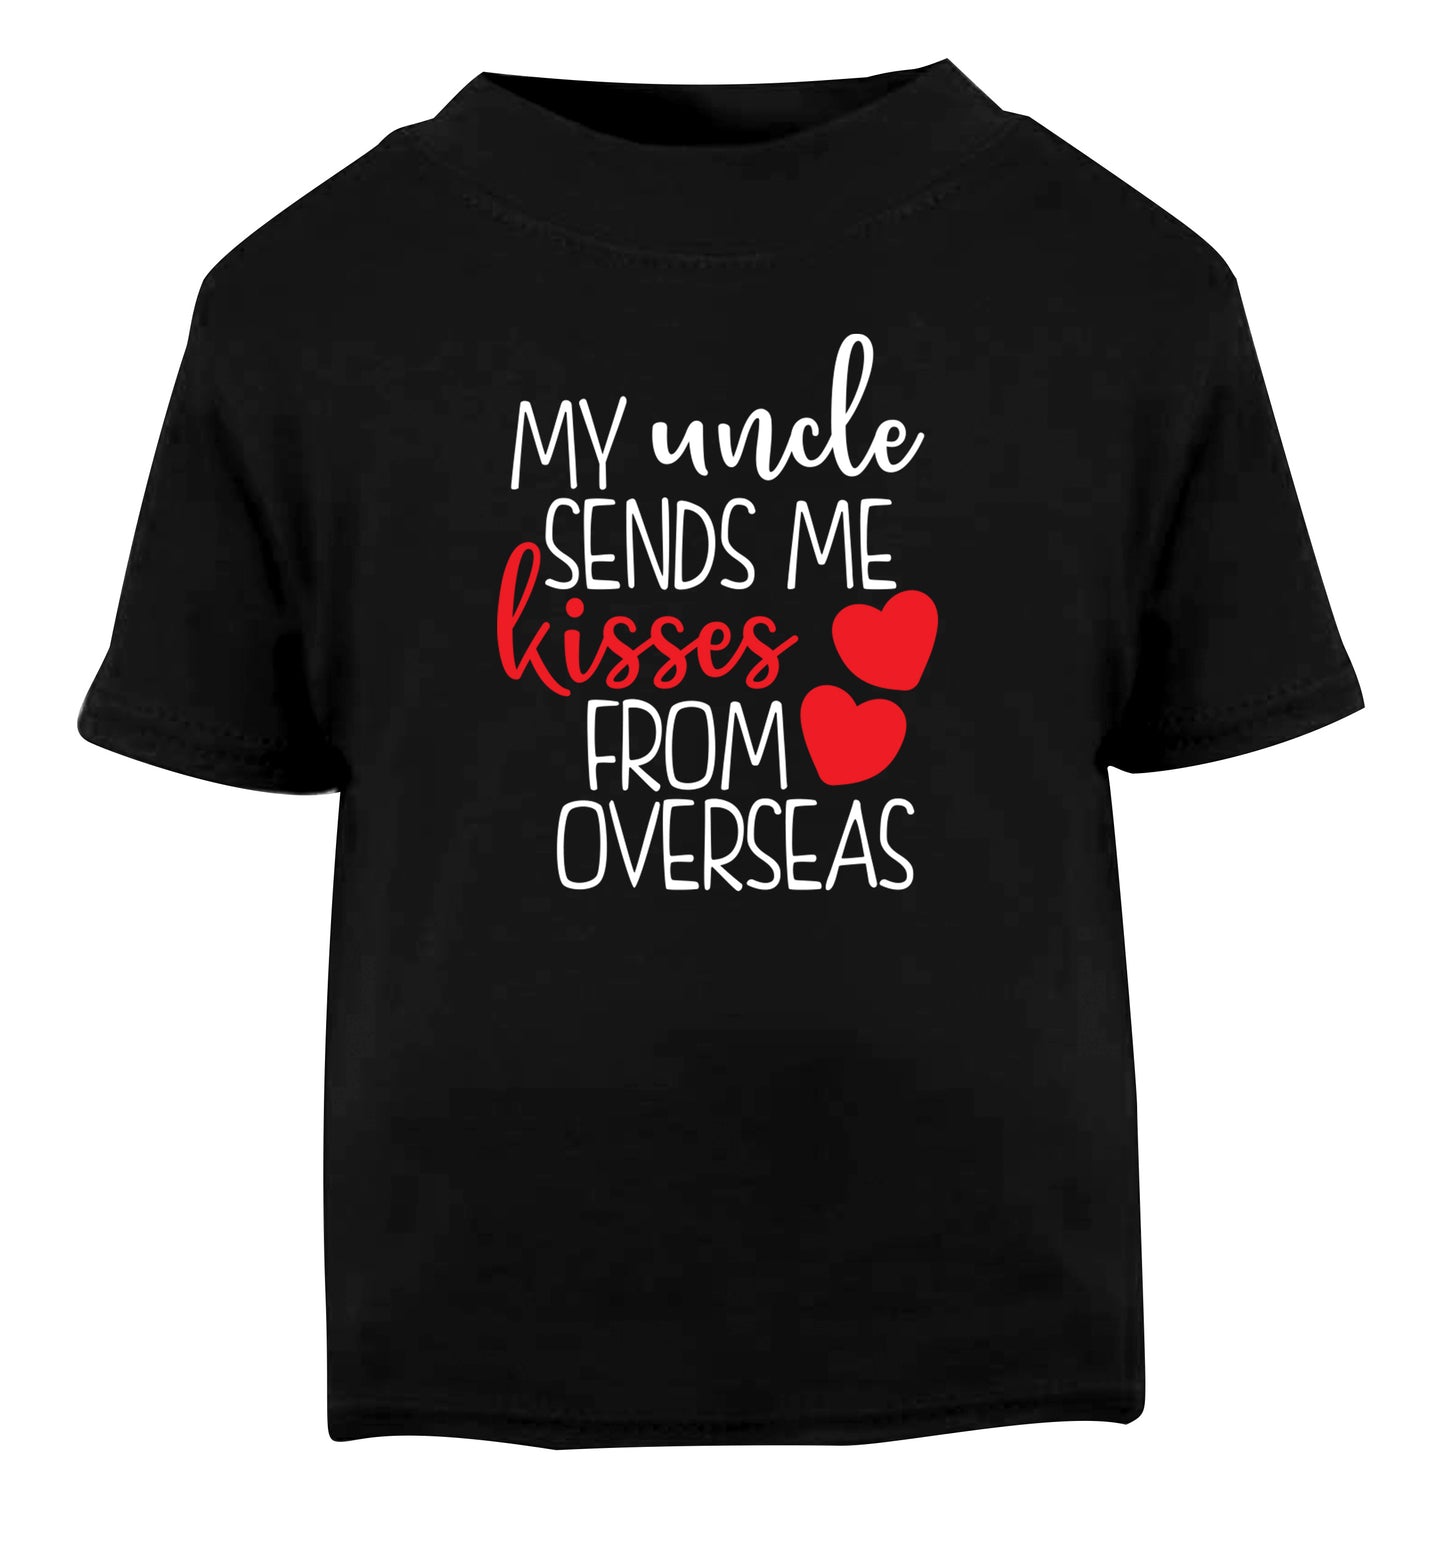 My uncle sends me kisses from overseas Black Baby Toddler Tshirt 2 years